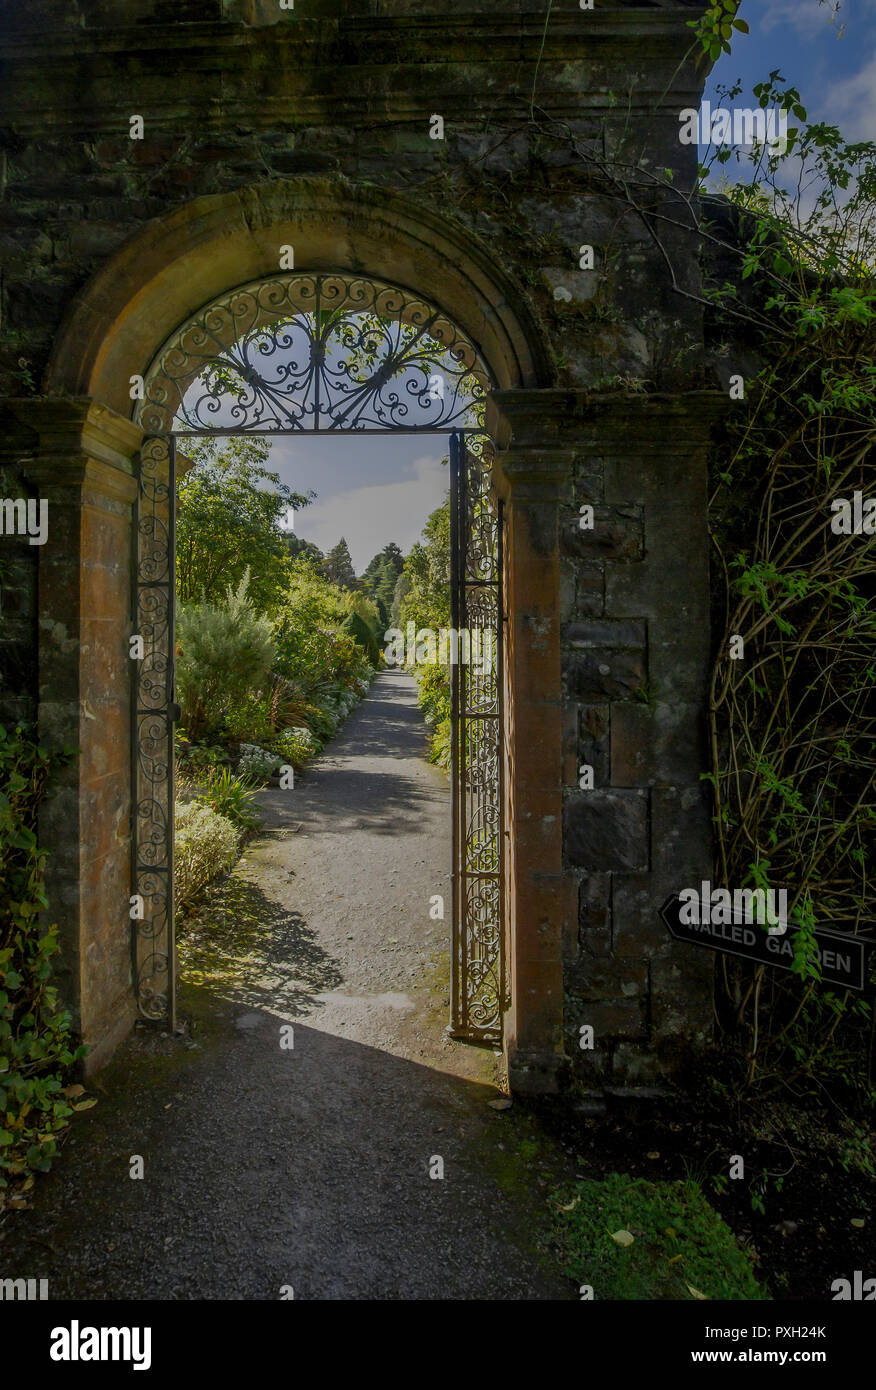 Arch and metal gate into the walled garden on Garnish Island, County Cork, Ireland. Stock Photo